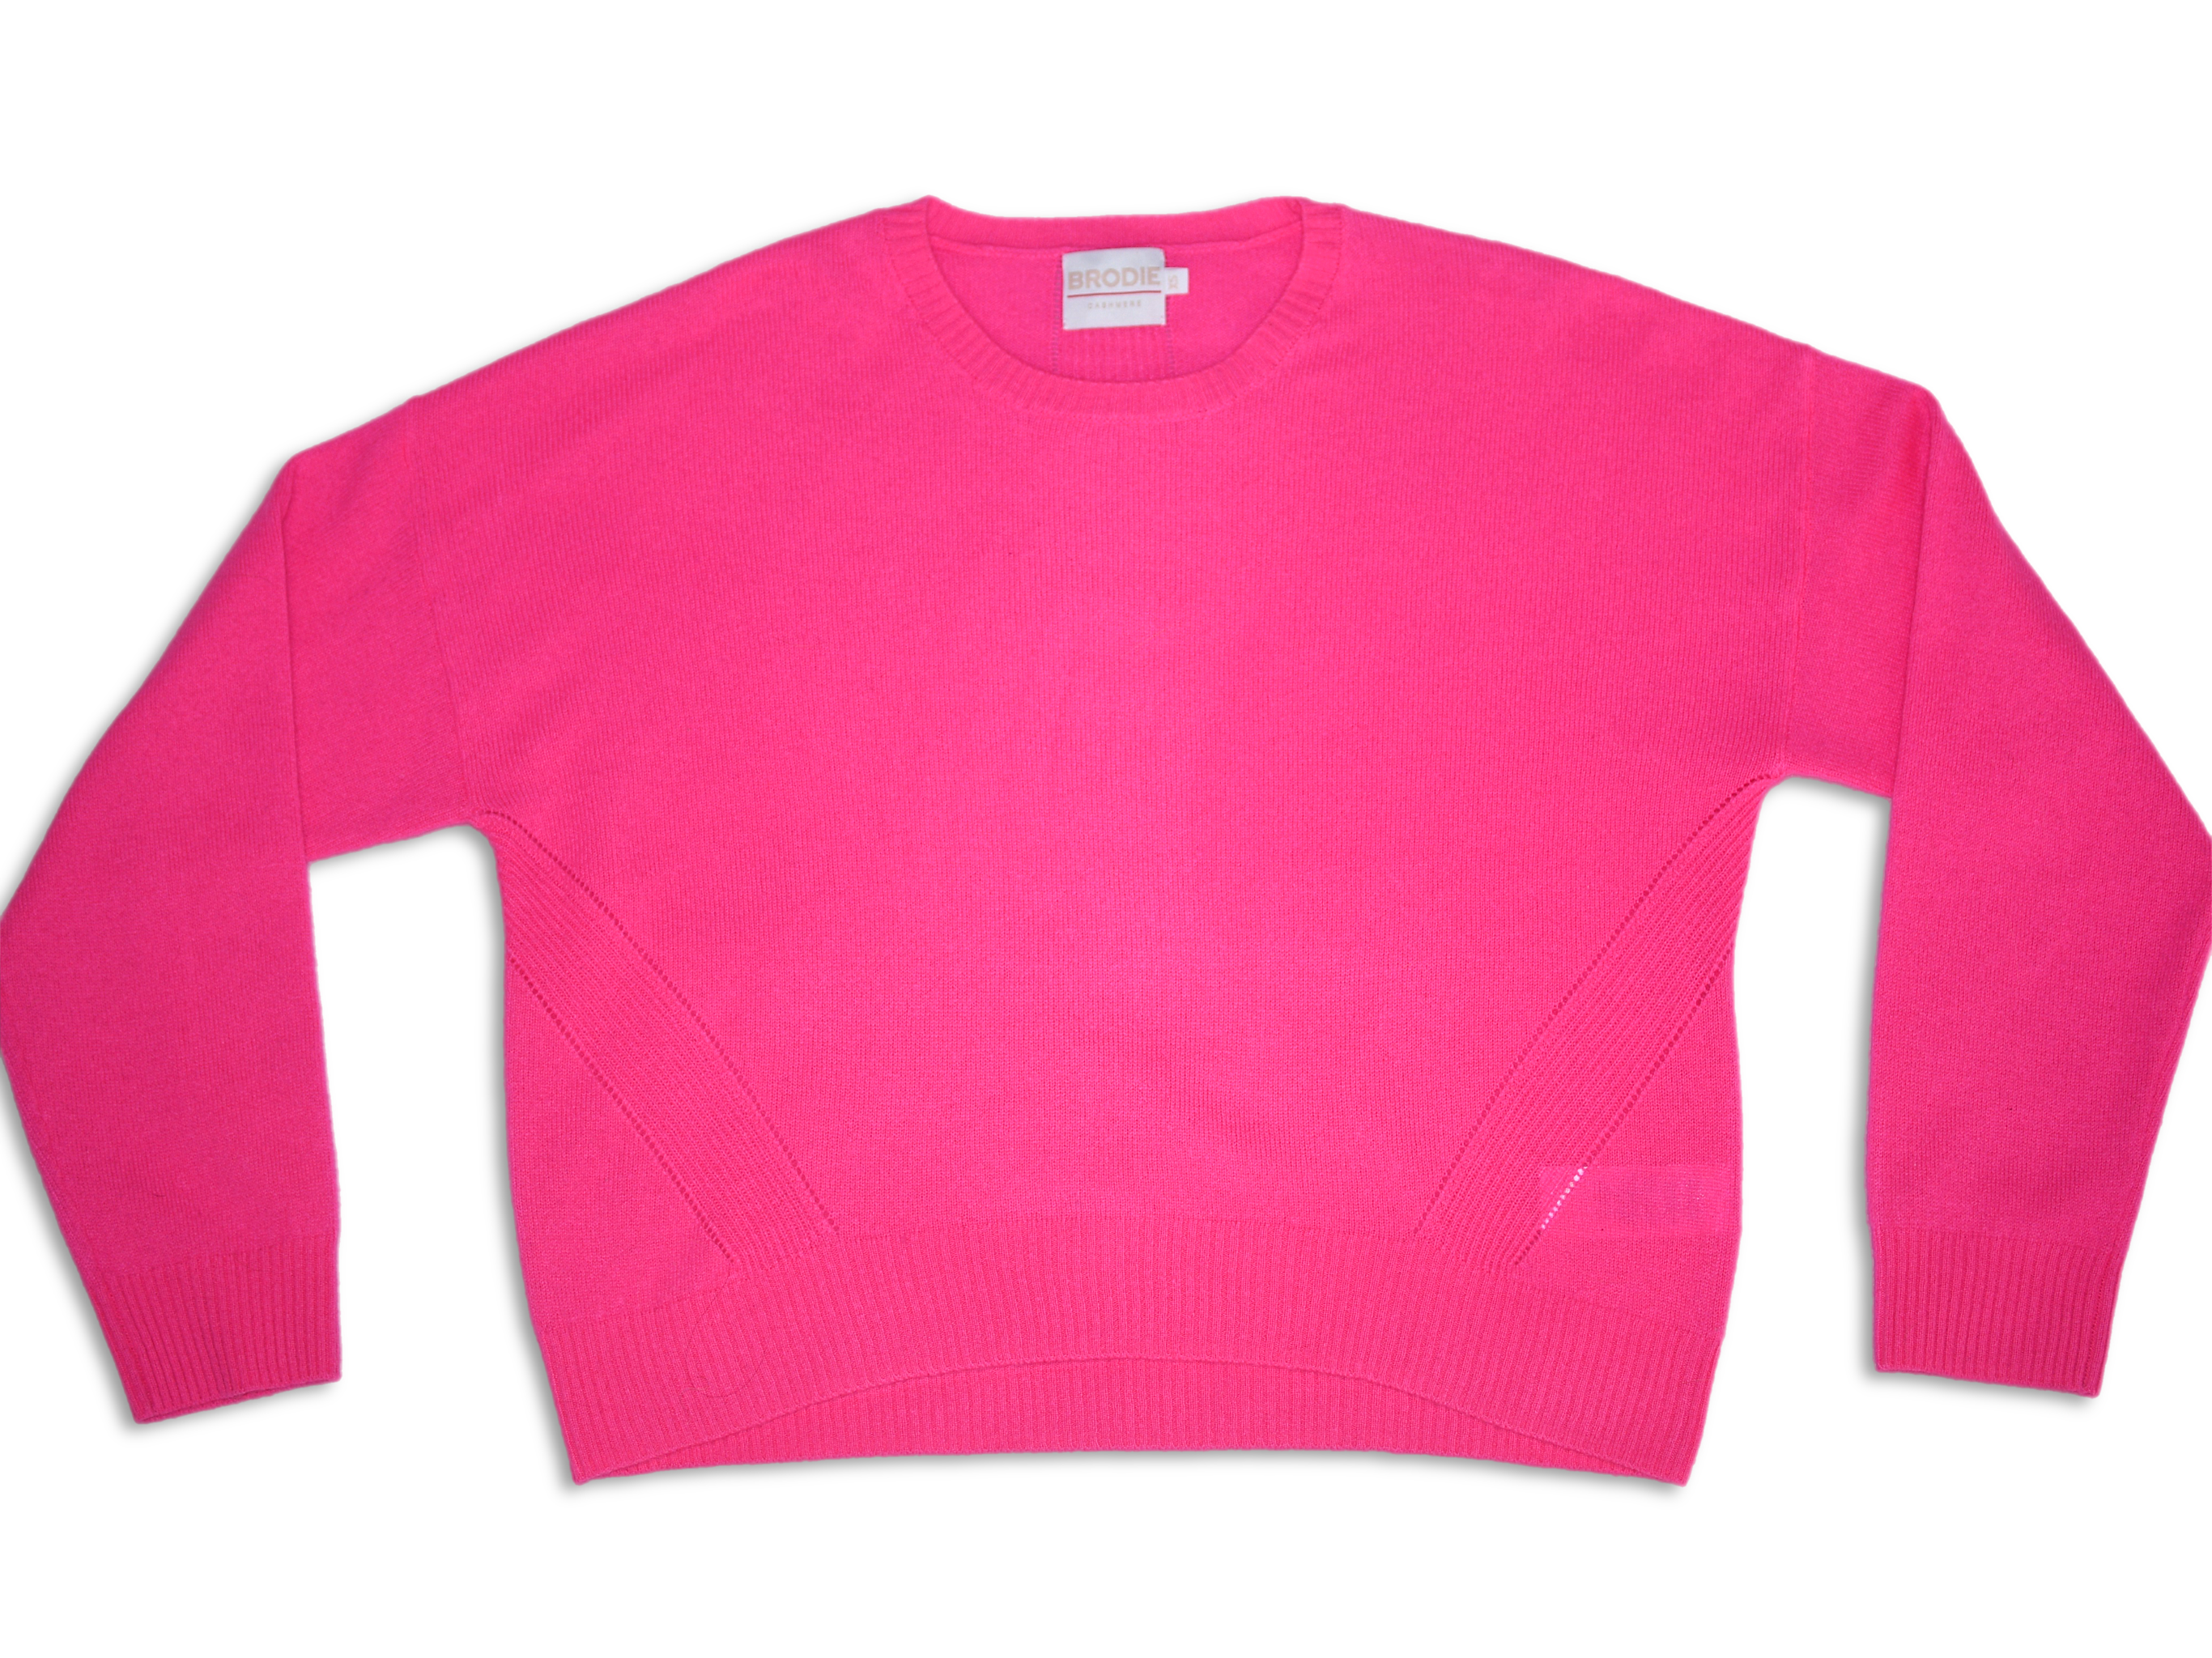 BRODIE PIPPA PINK SWEATER